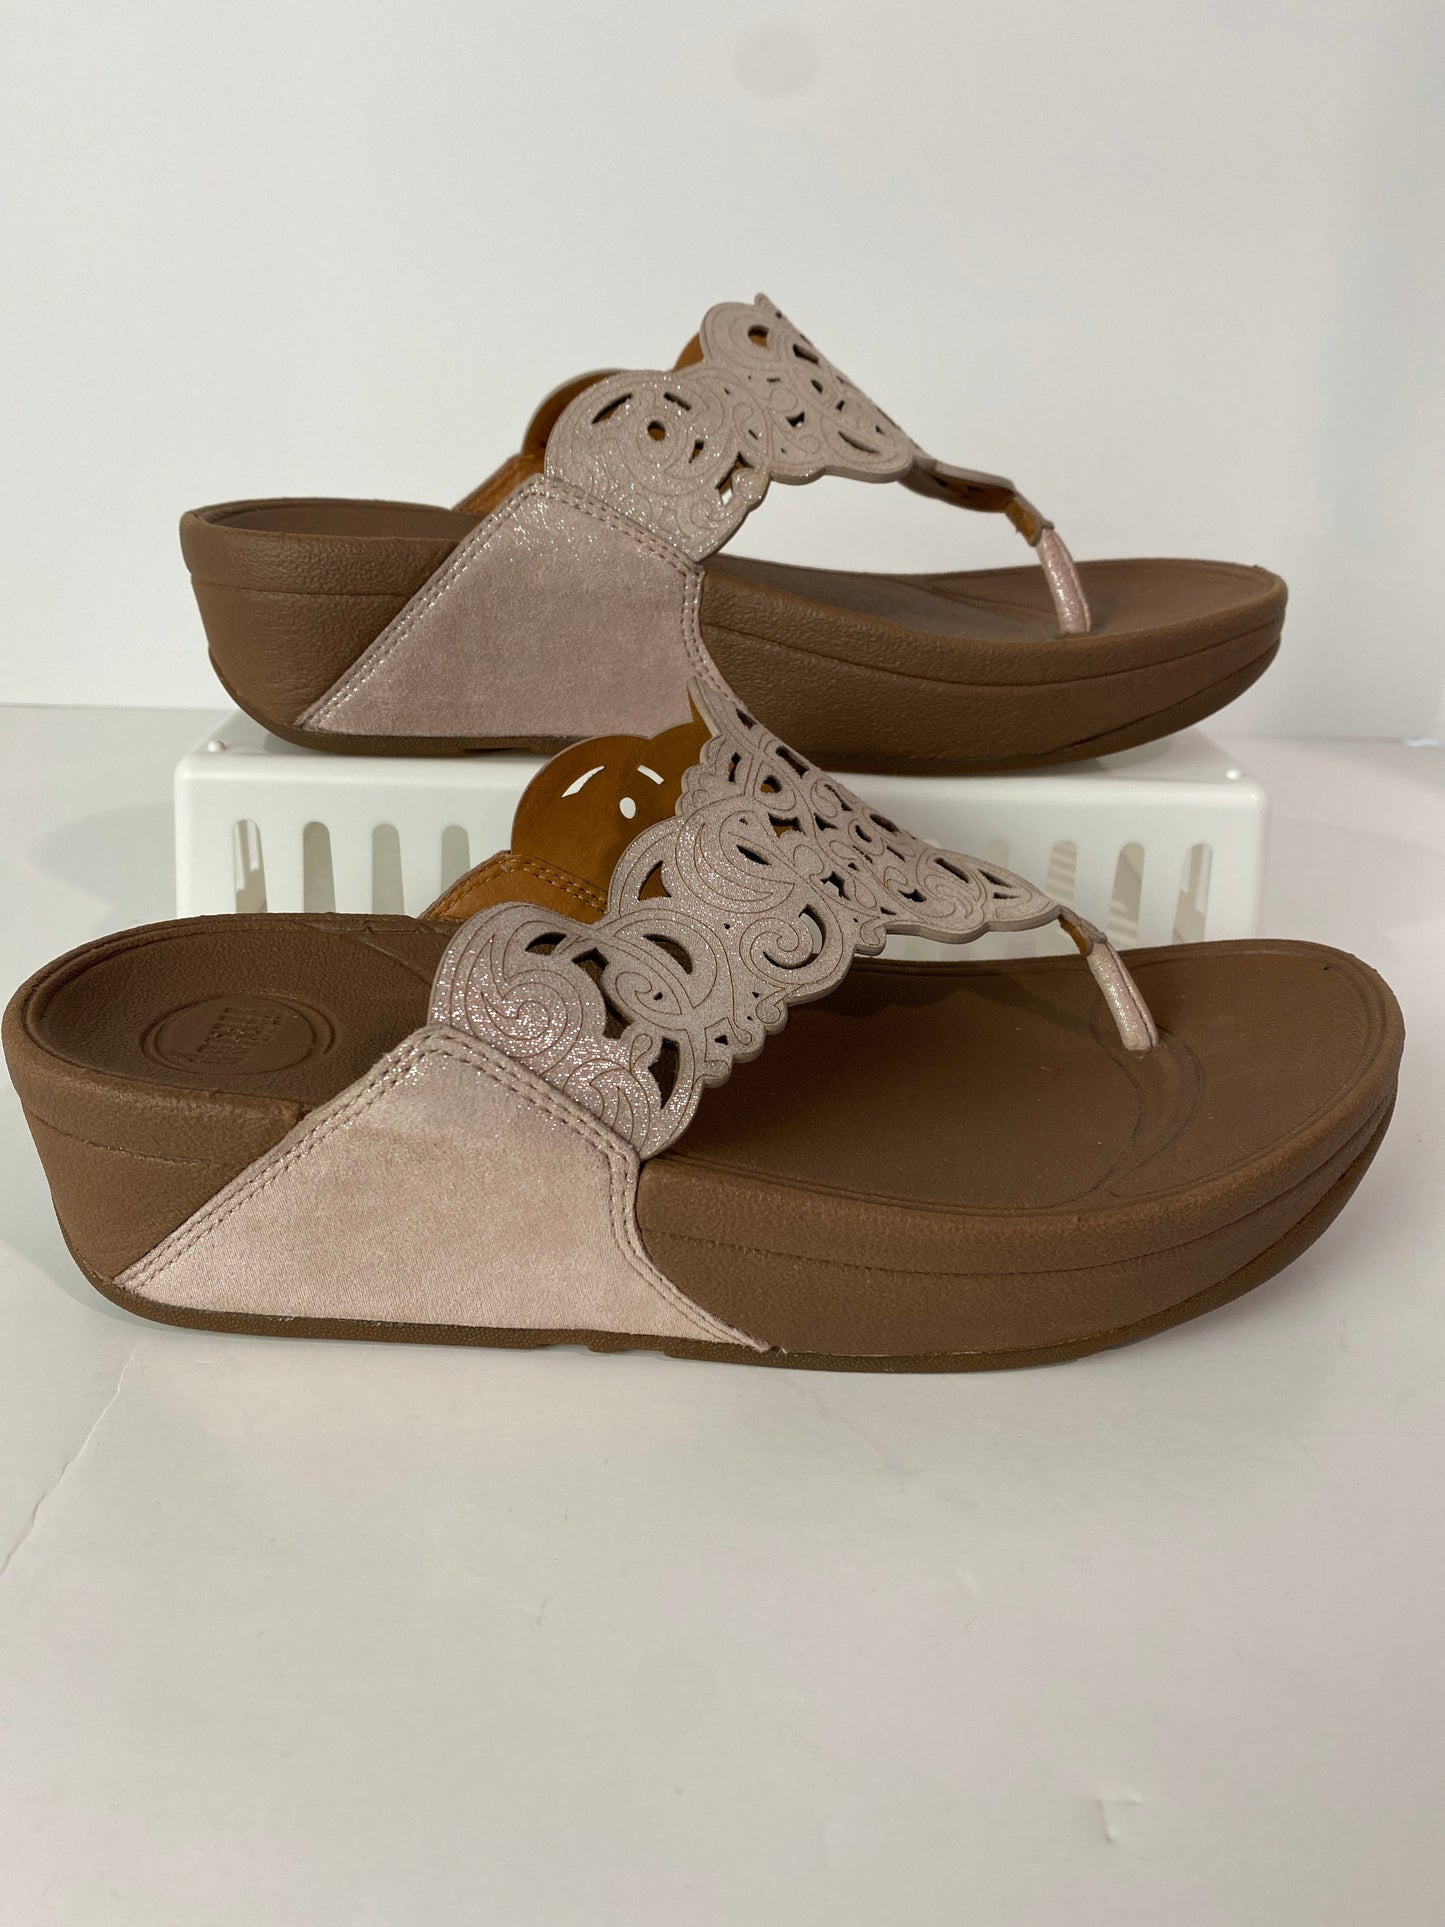 Brown Sandals Flats Fitflop, Size 6